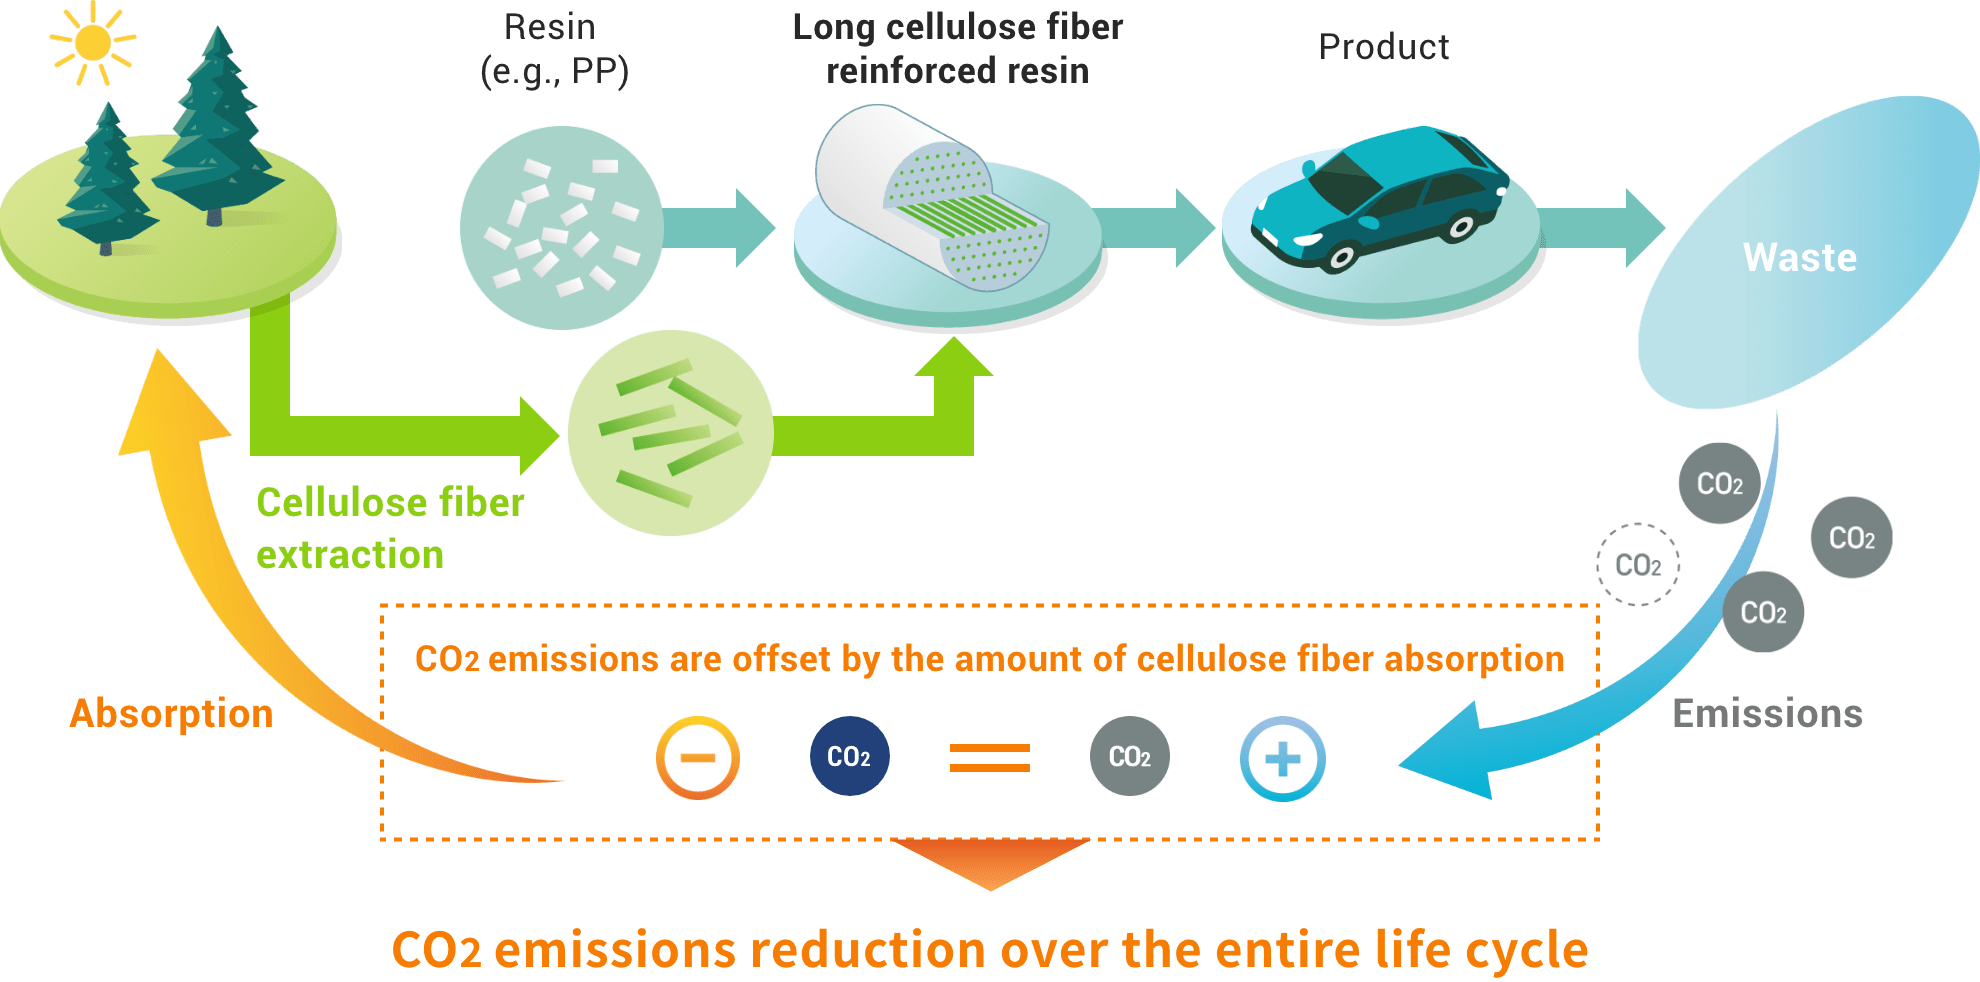 CO2 emissions reduction over the entire life cycle